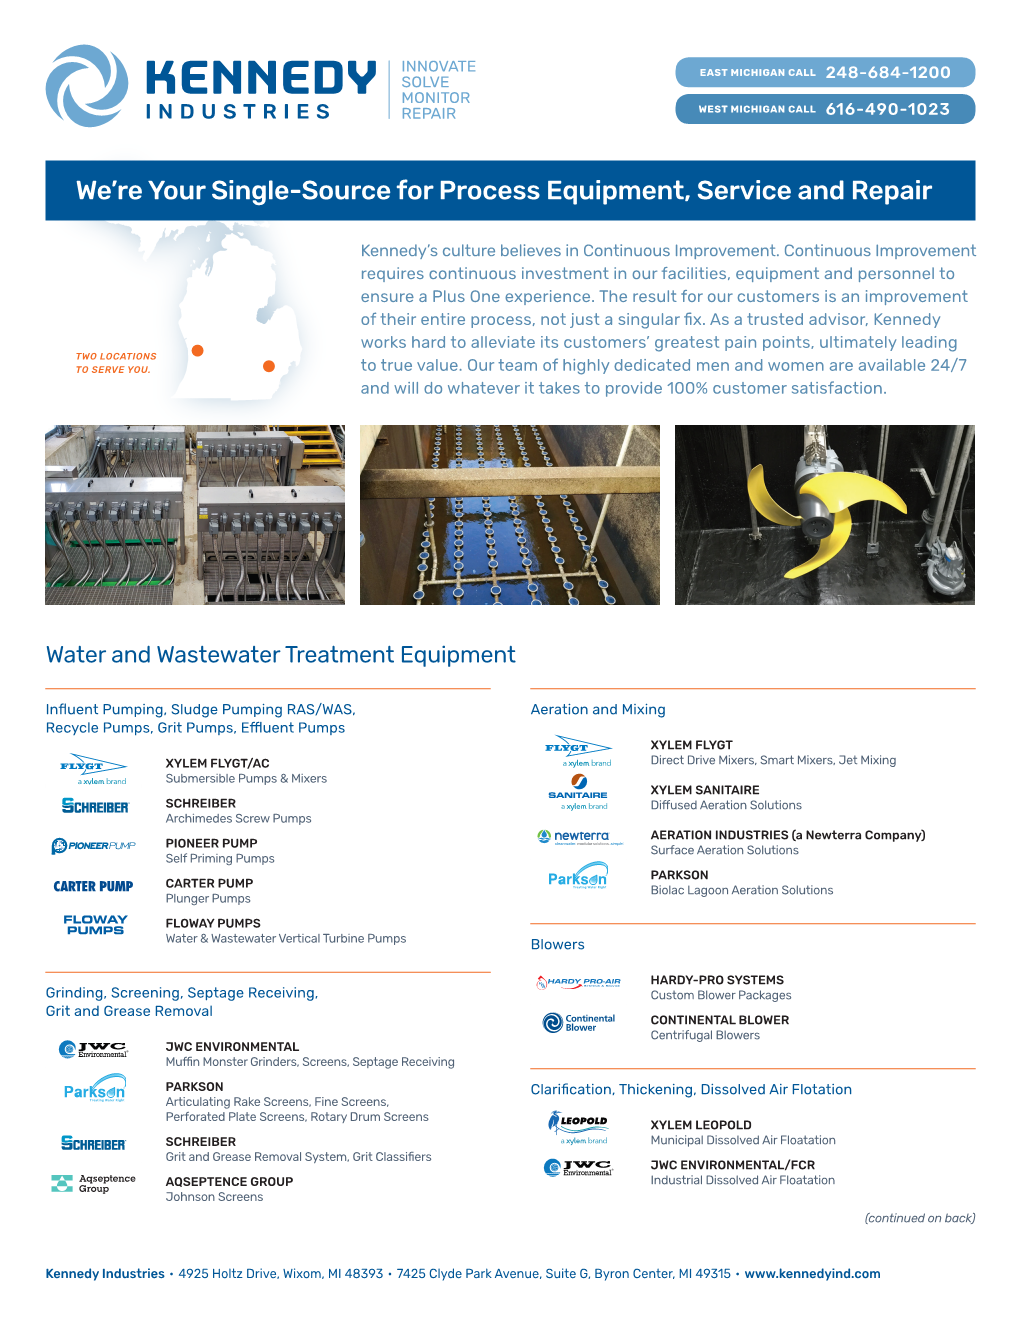 We're Your Single-Source for Process Equipment, Service and Repair